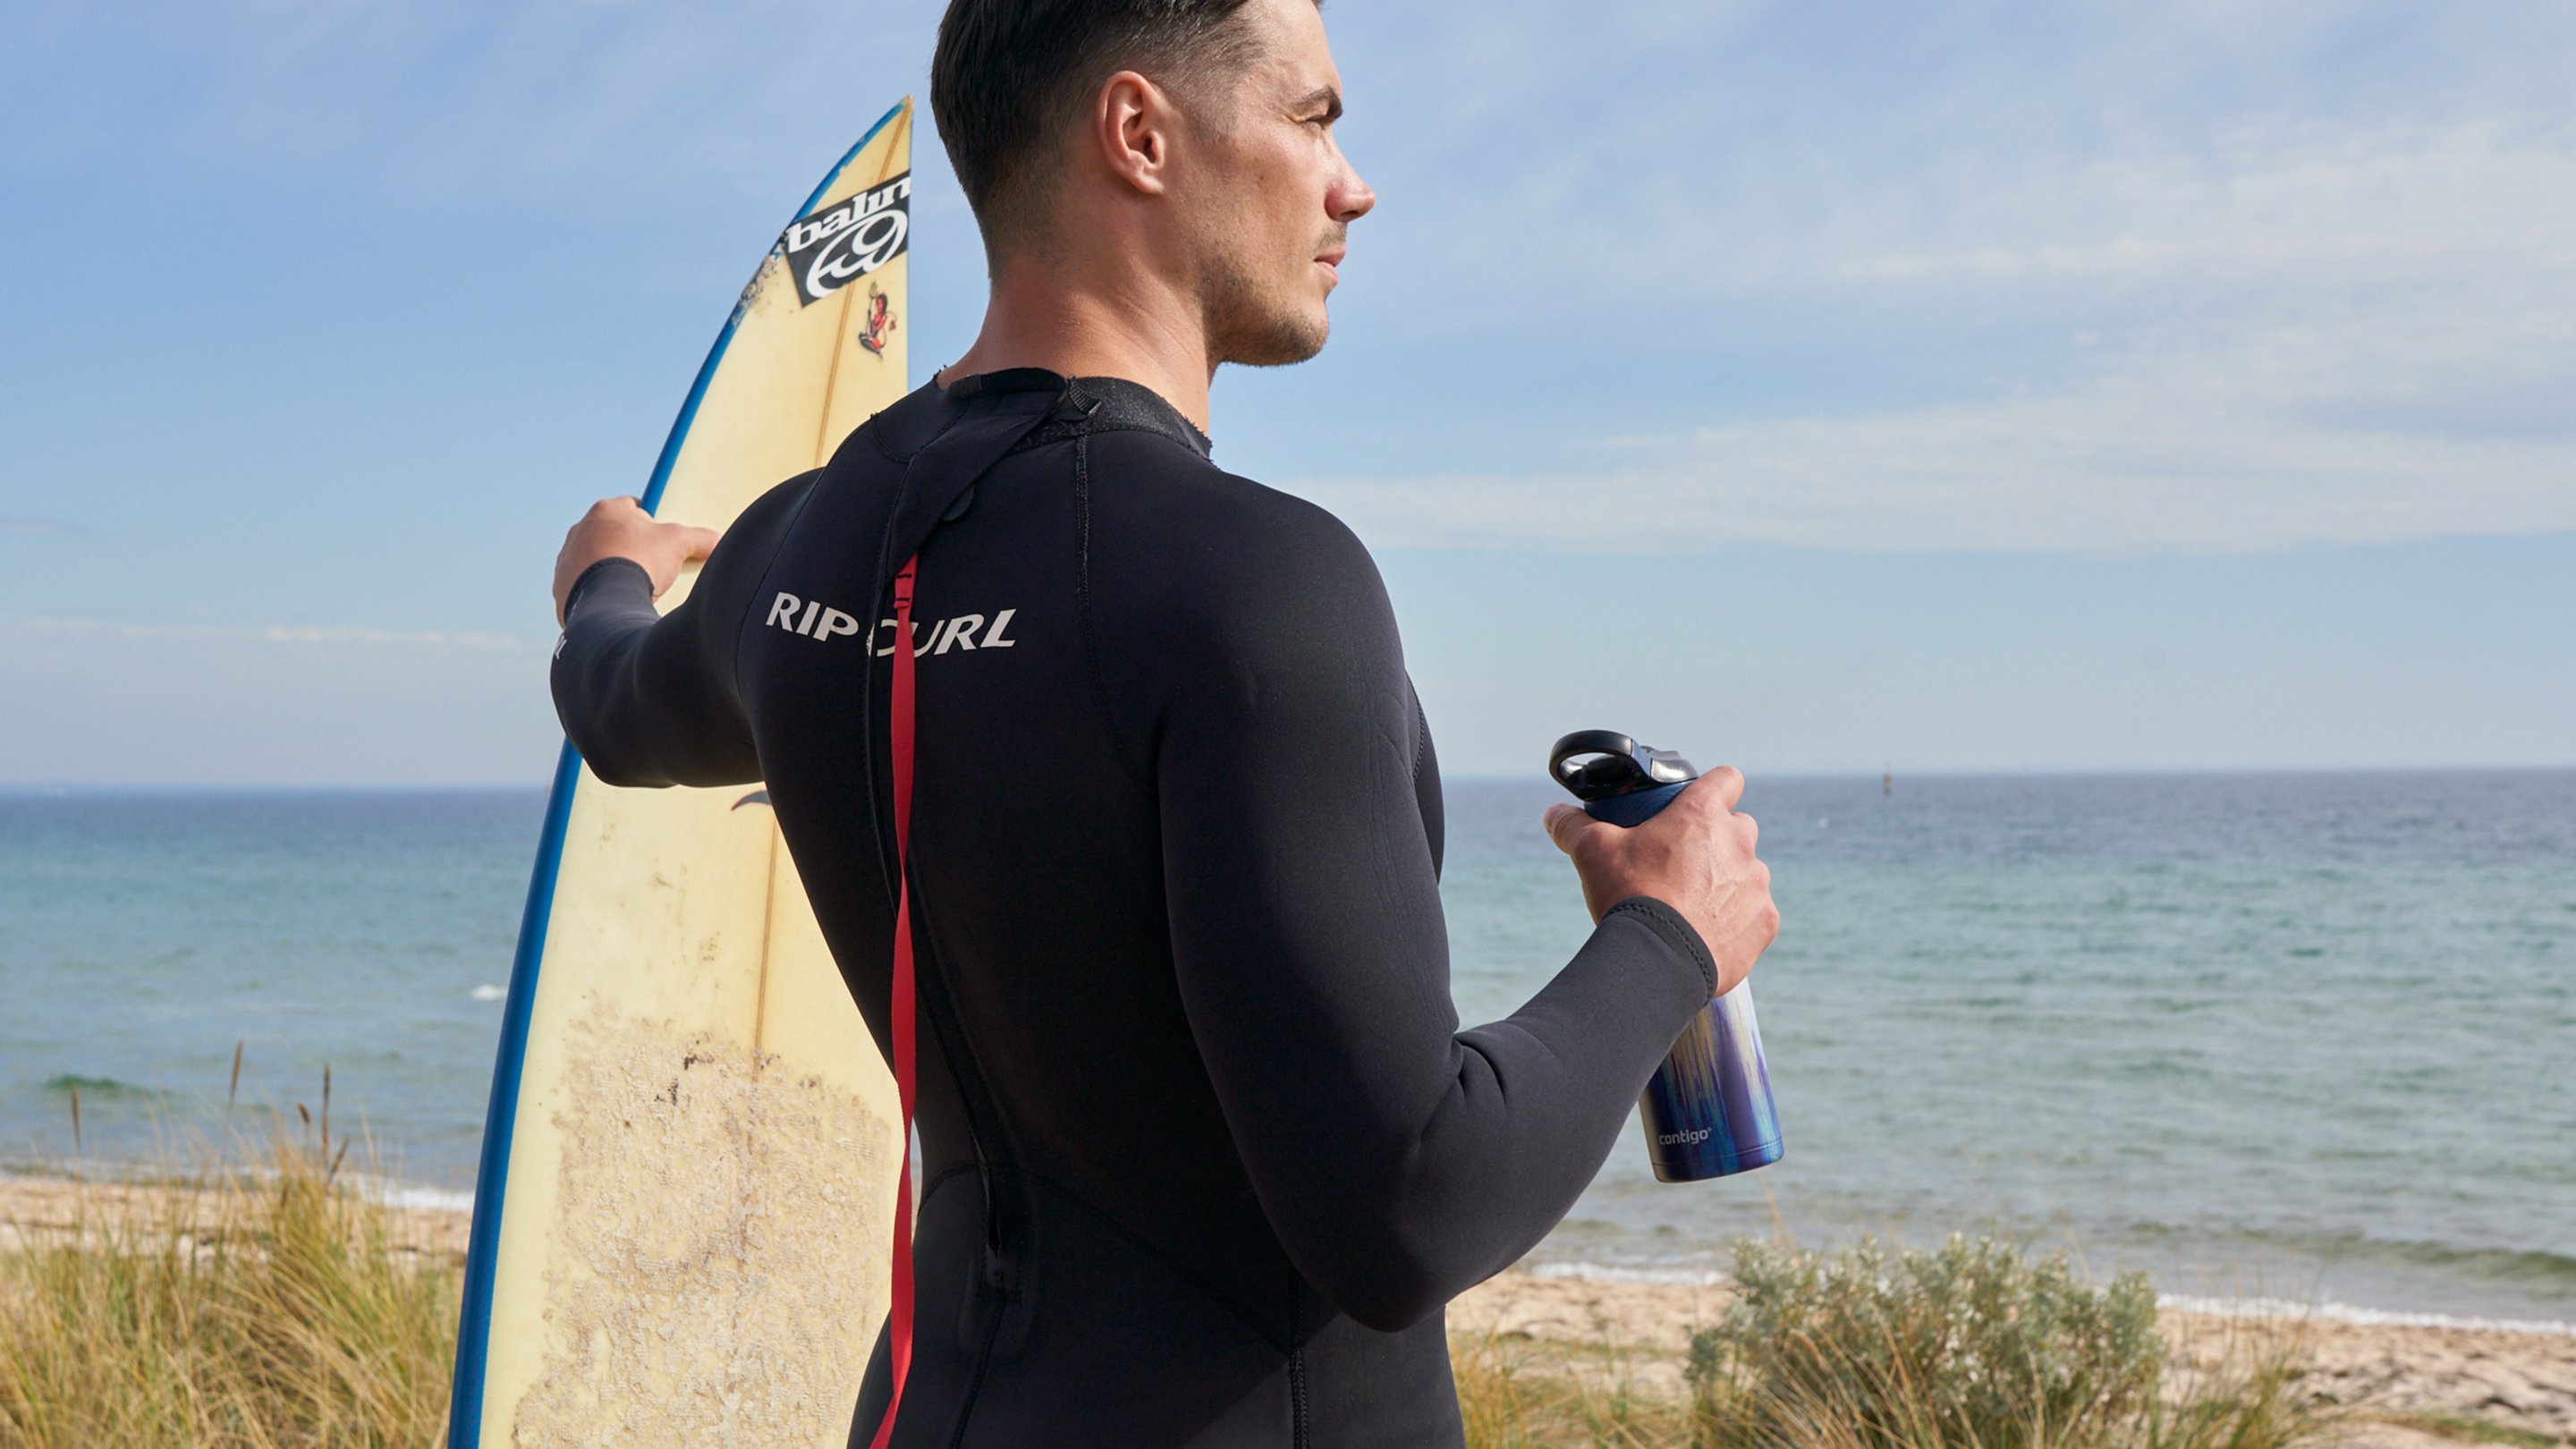 Person holding a surfboard in one hand and a water bottle in the other